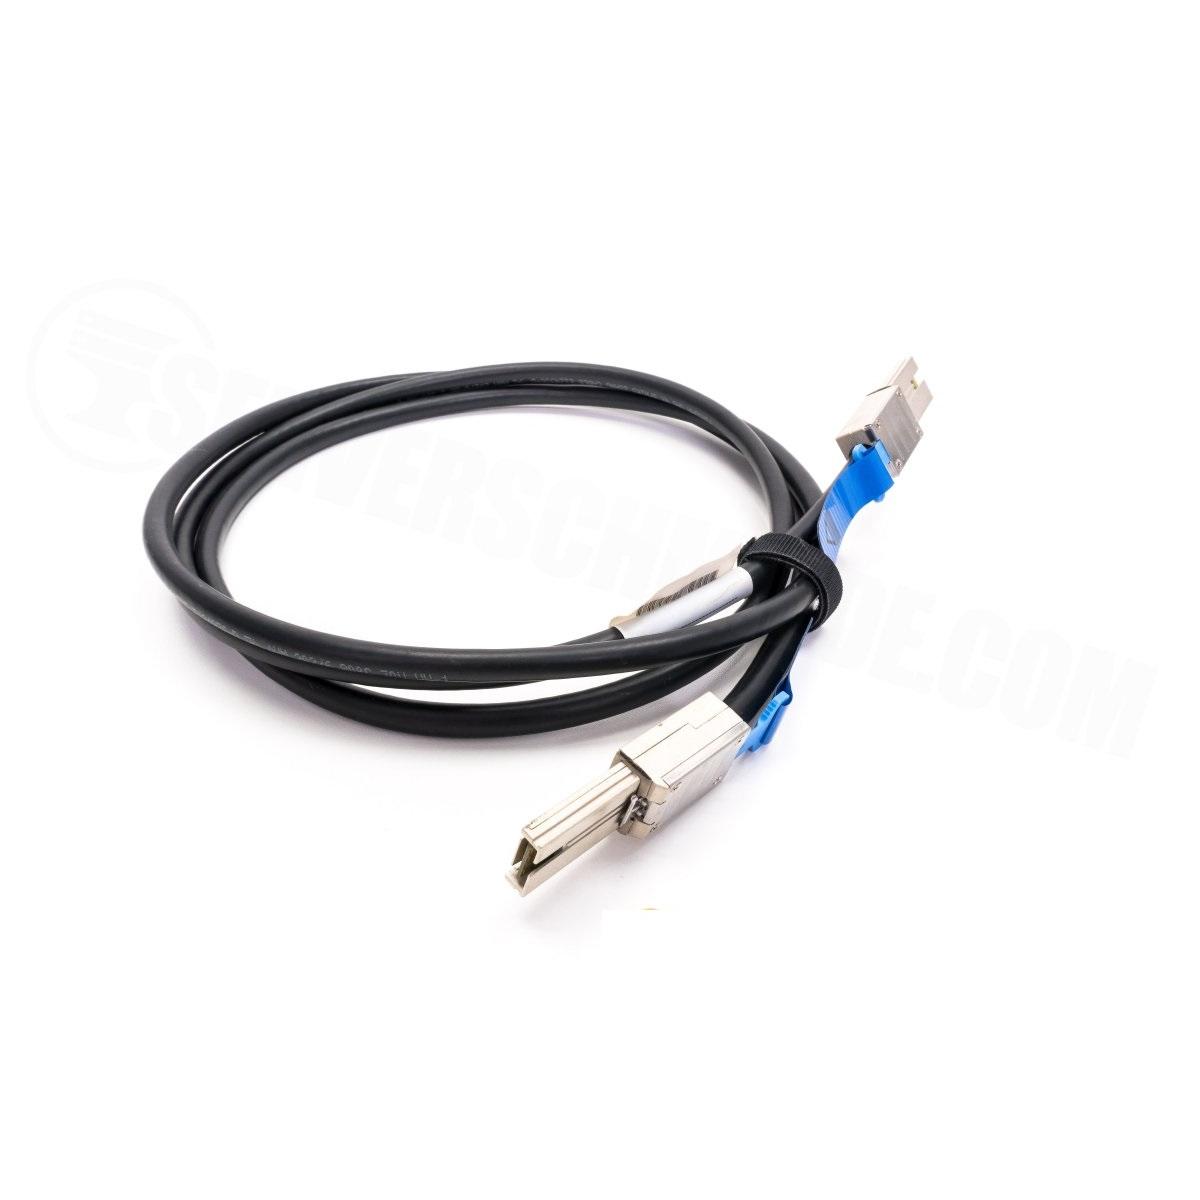 2M SFF-8088 to SFF-8088 External Mini SAS Cable Compatible with HP 408767-001/407344-003 